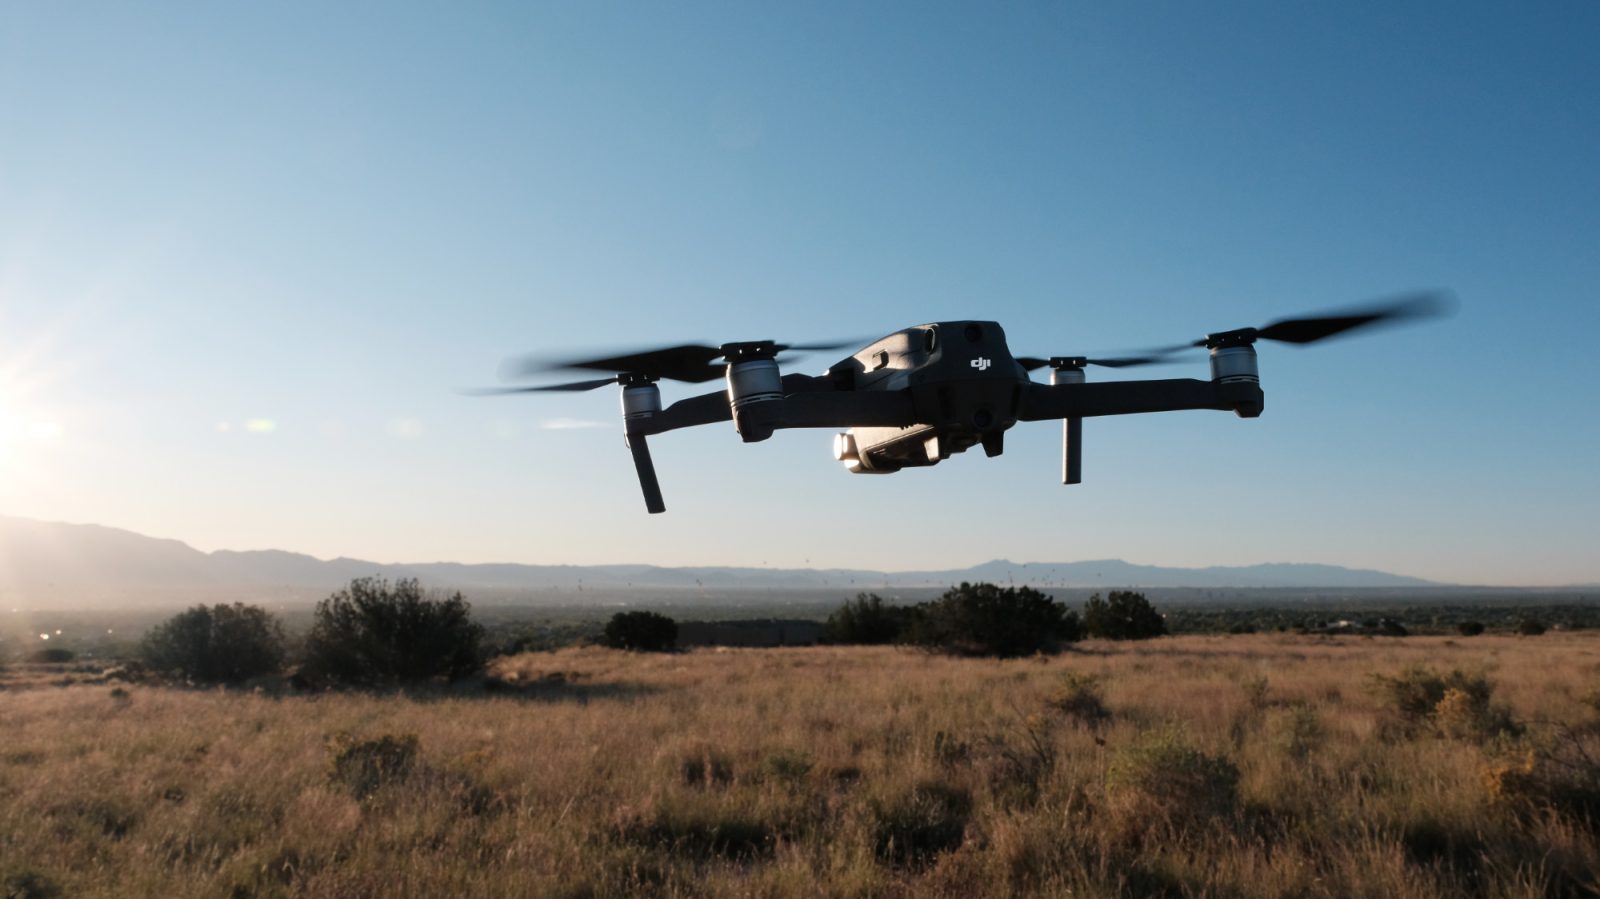 All-DJI-drones-grounded-by-US-Interior-Department-amid-review.jpg